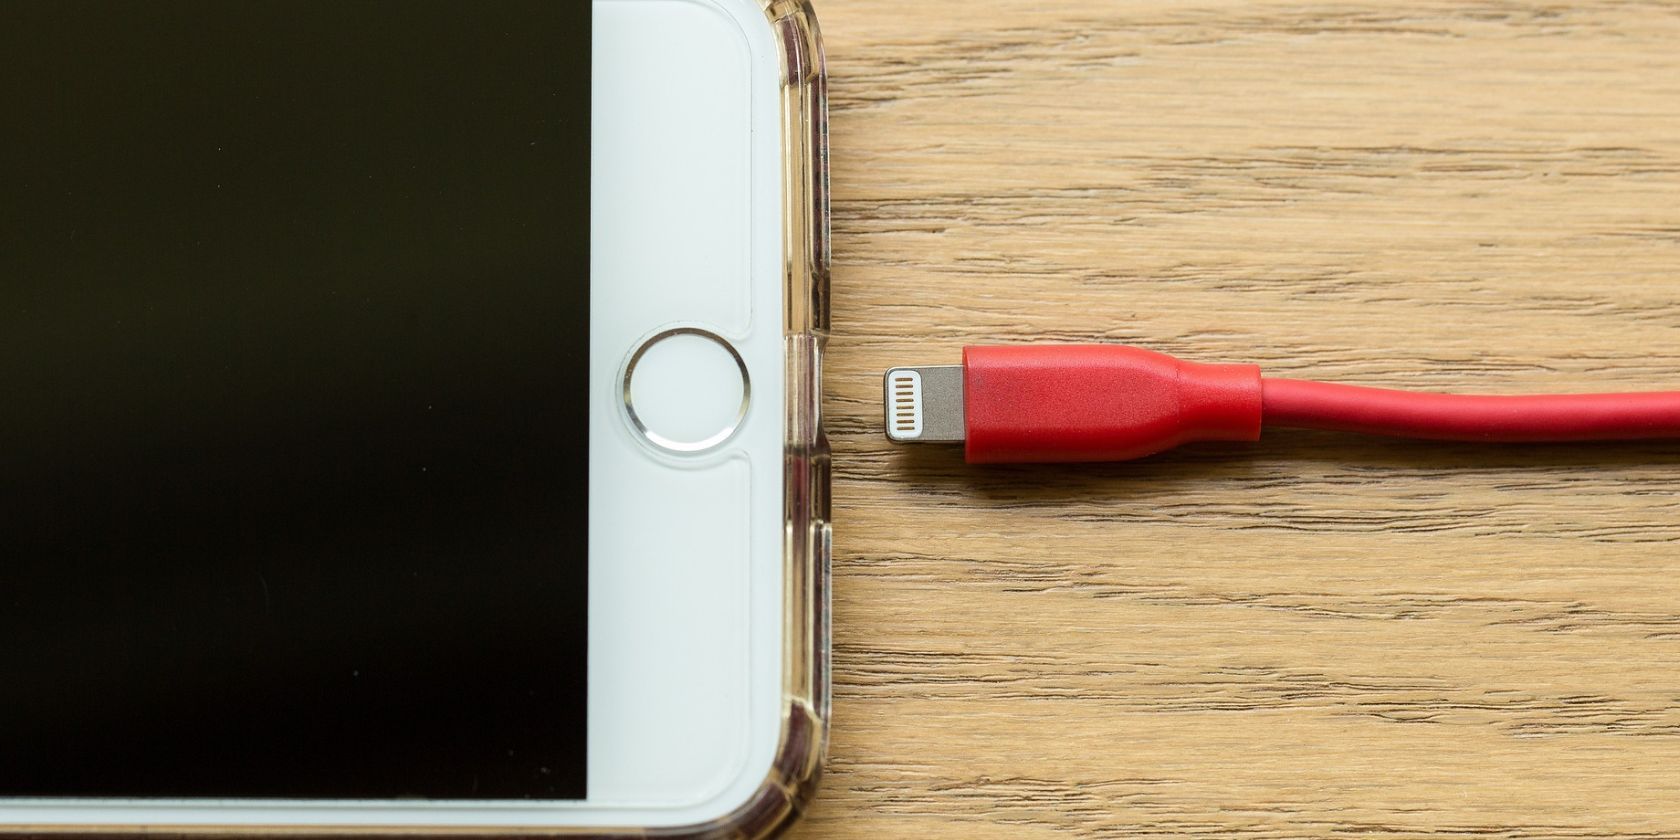 iphone charging port next to lightning charging cable